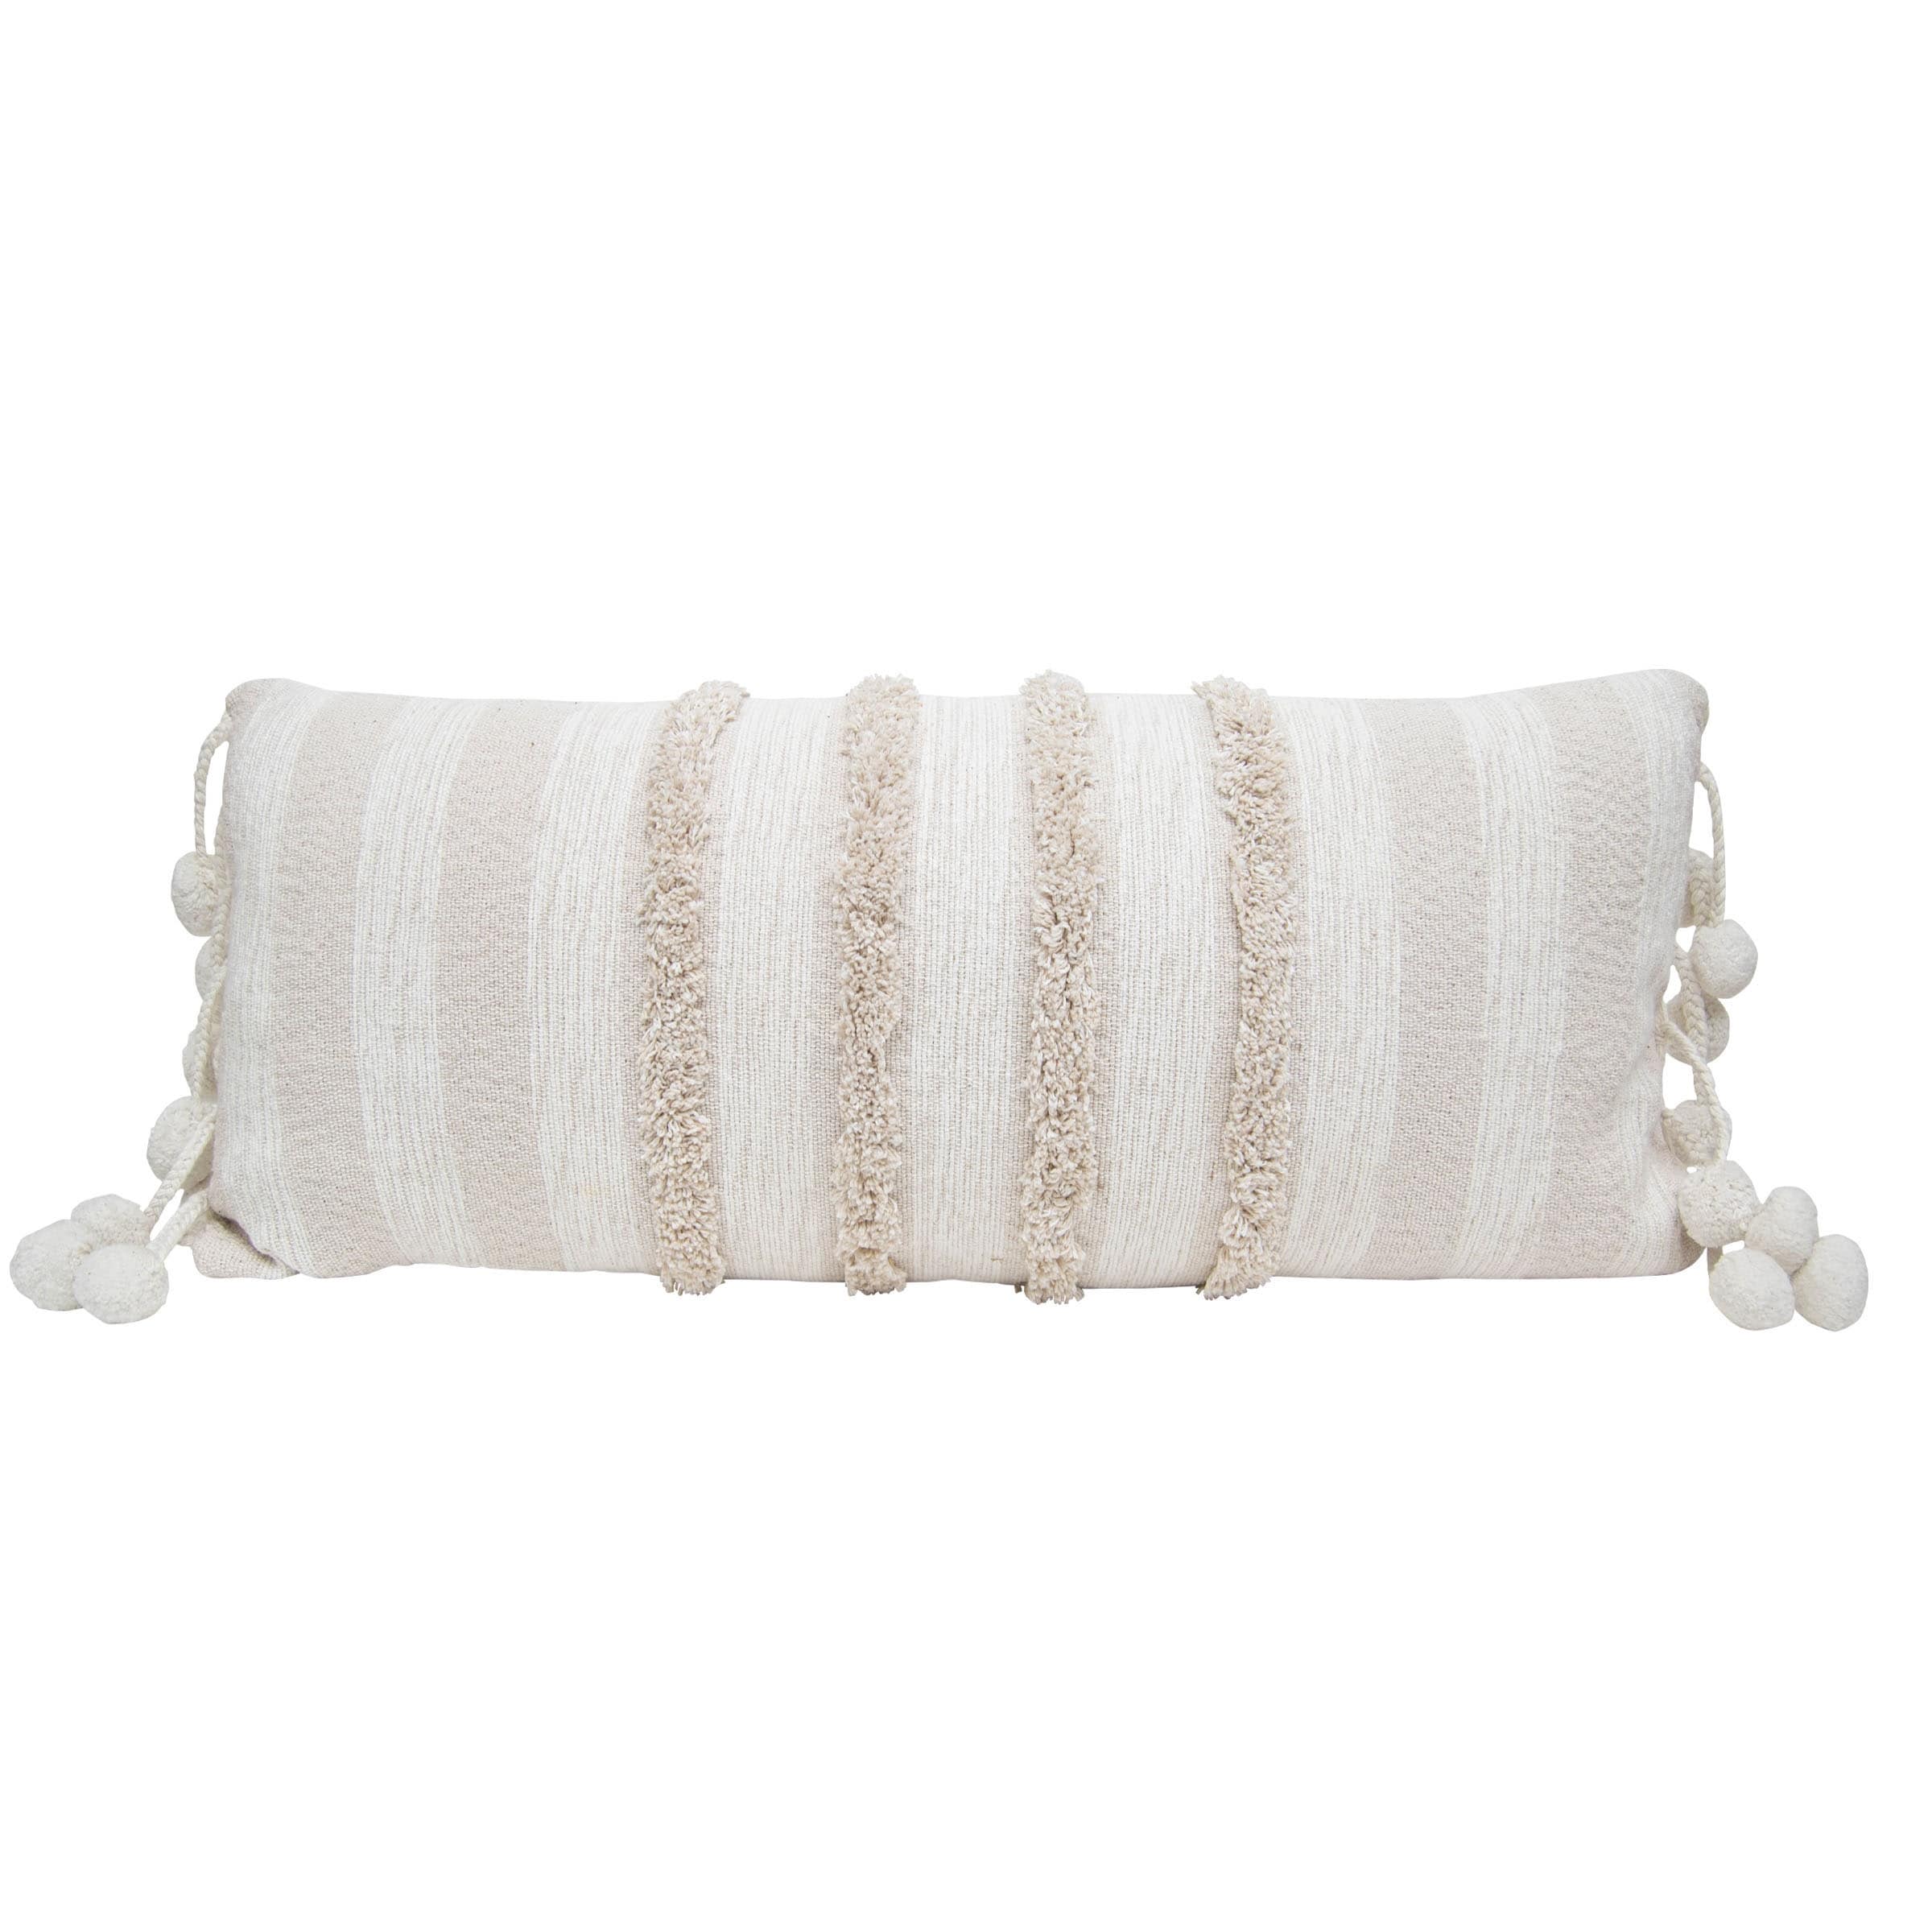 Foreside Home & Garden Hand Woven White Cotton with Polyester Fill Throw Pillow